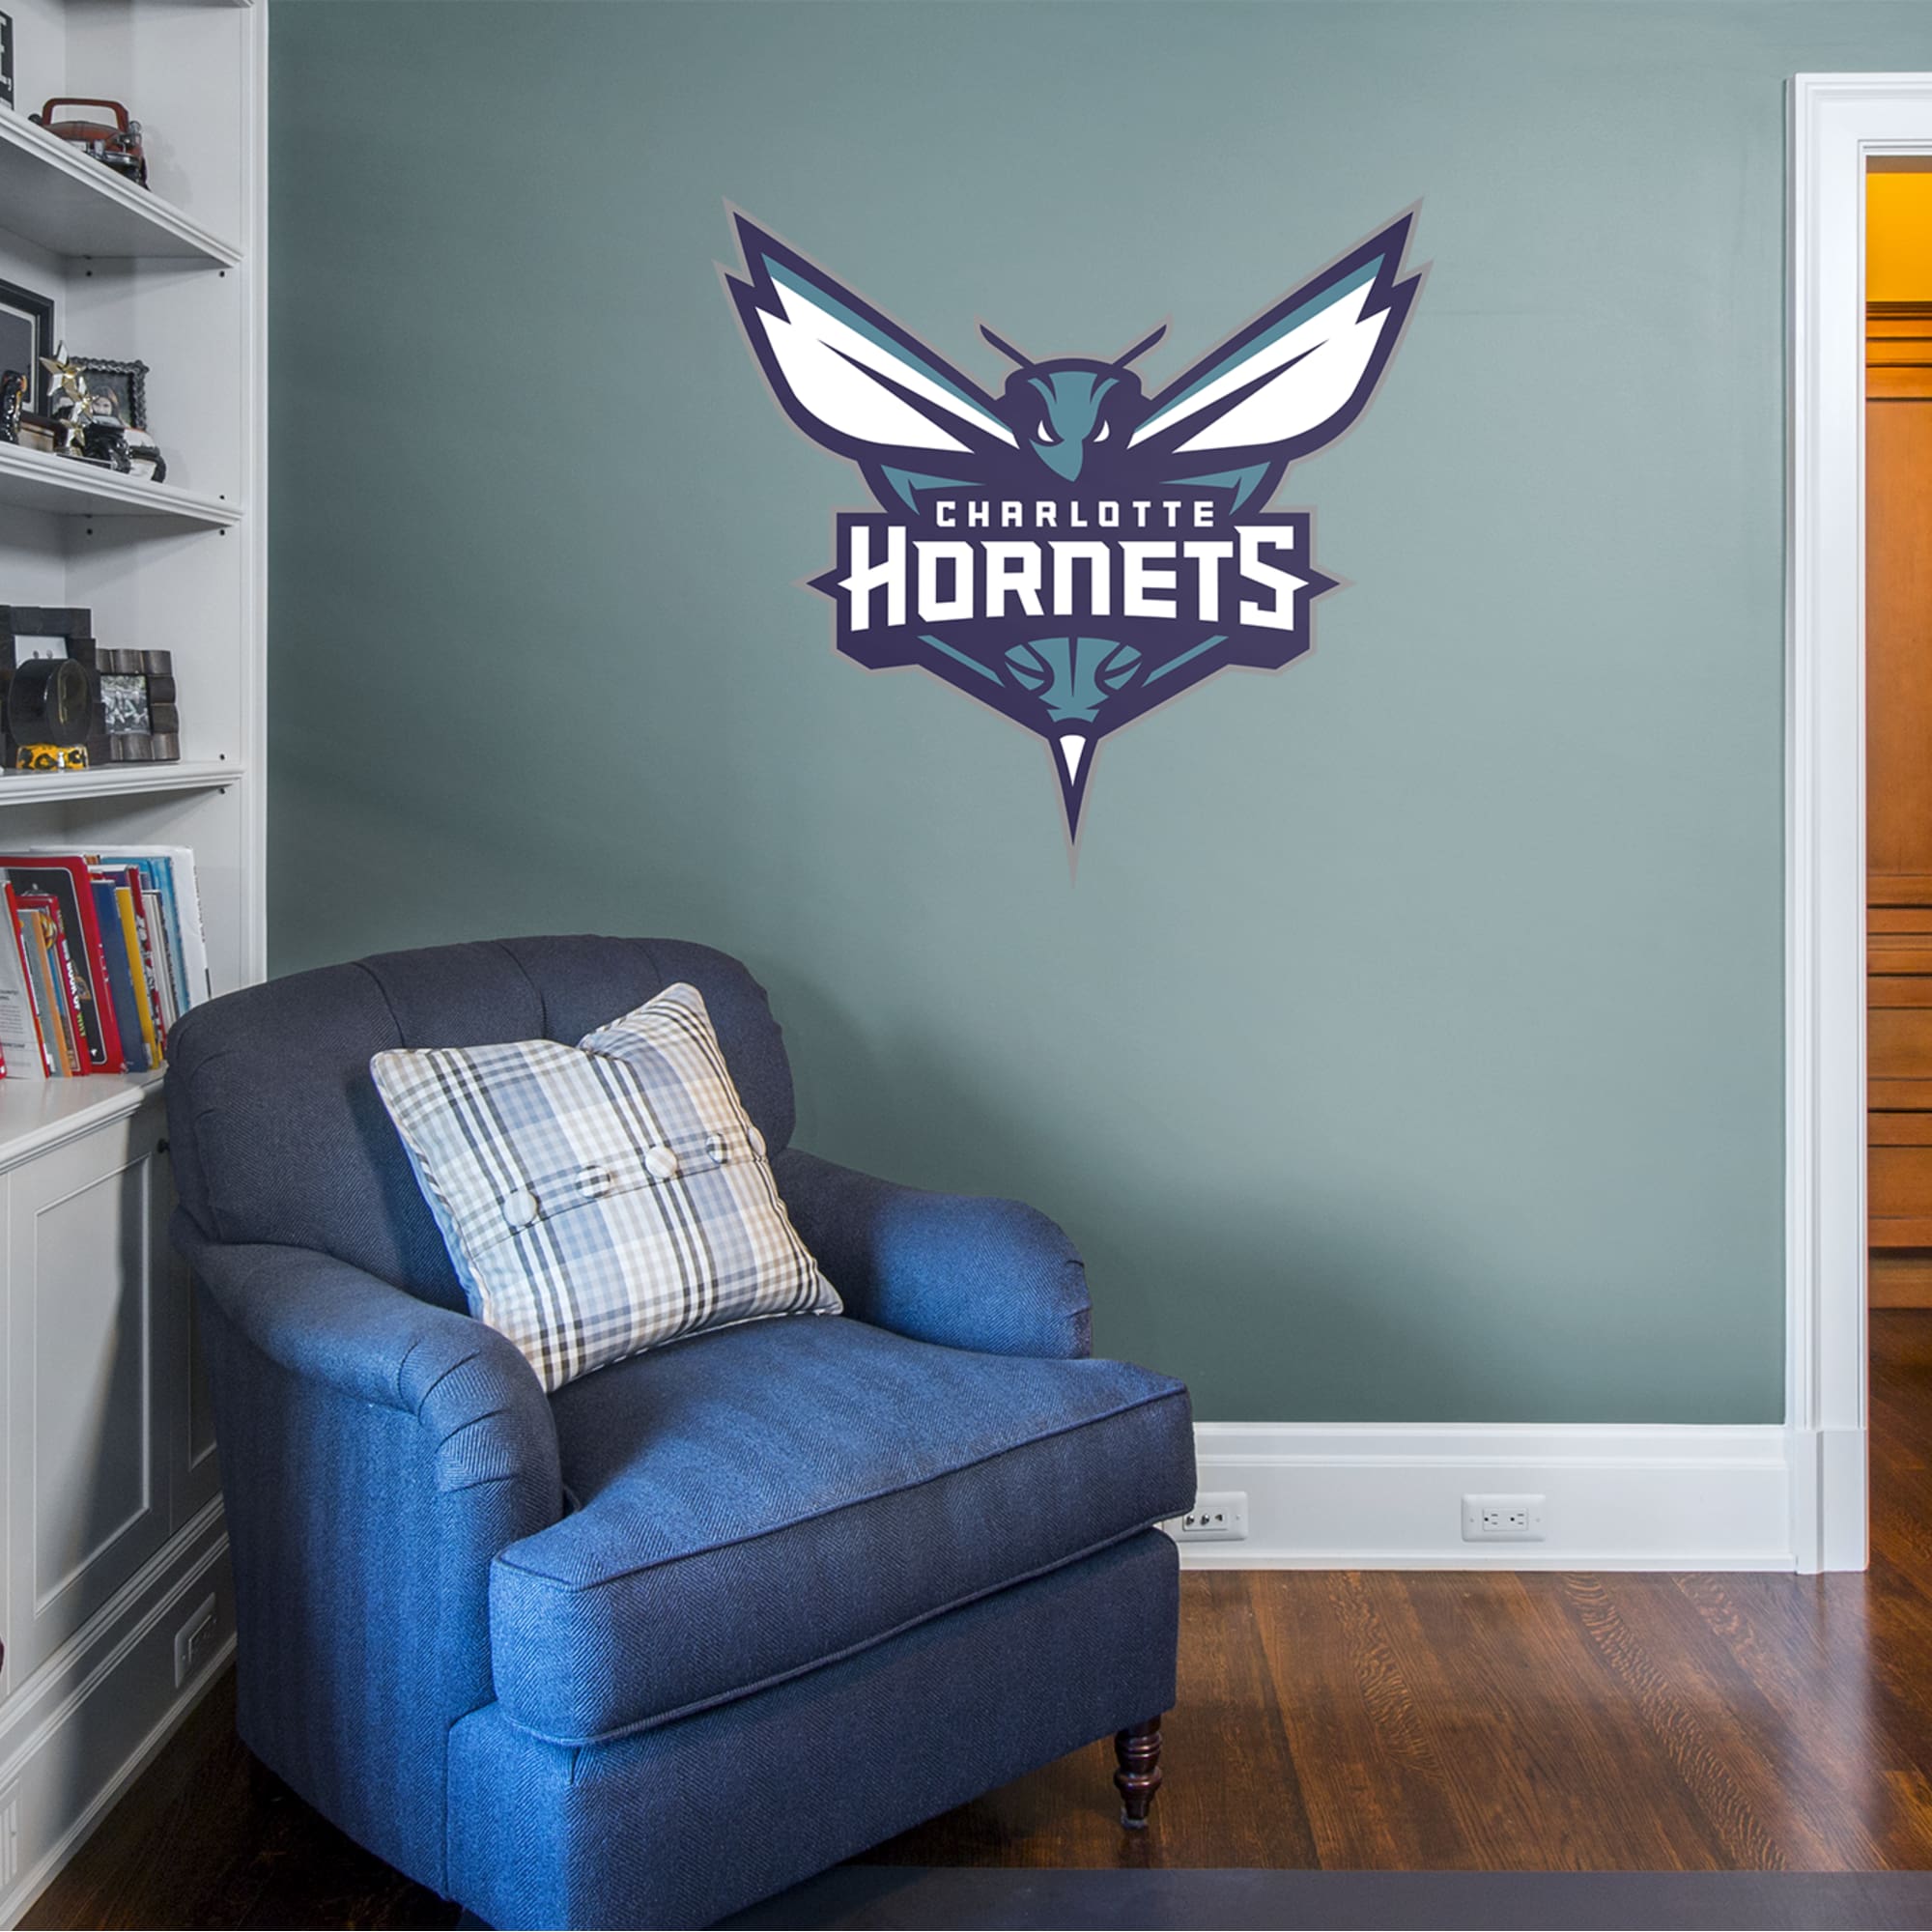 Charlotte Hornets: Logo - Officially Licensed NBA Removable Wall Decal Default Title by Fathead | Vinyl